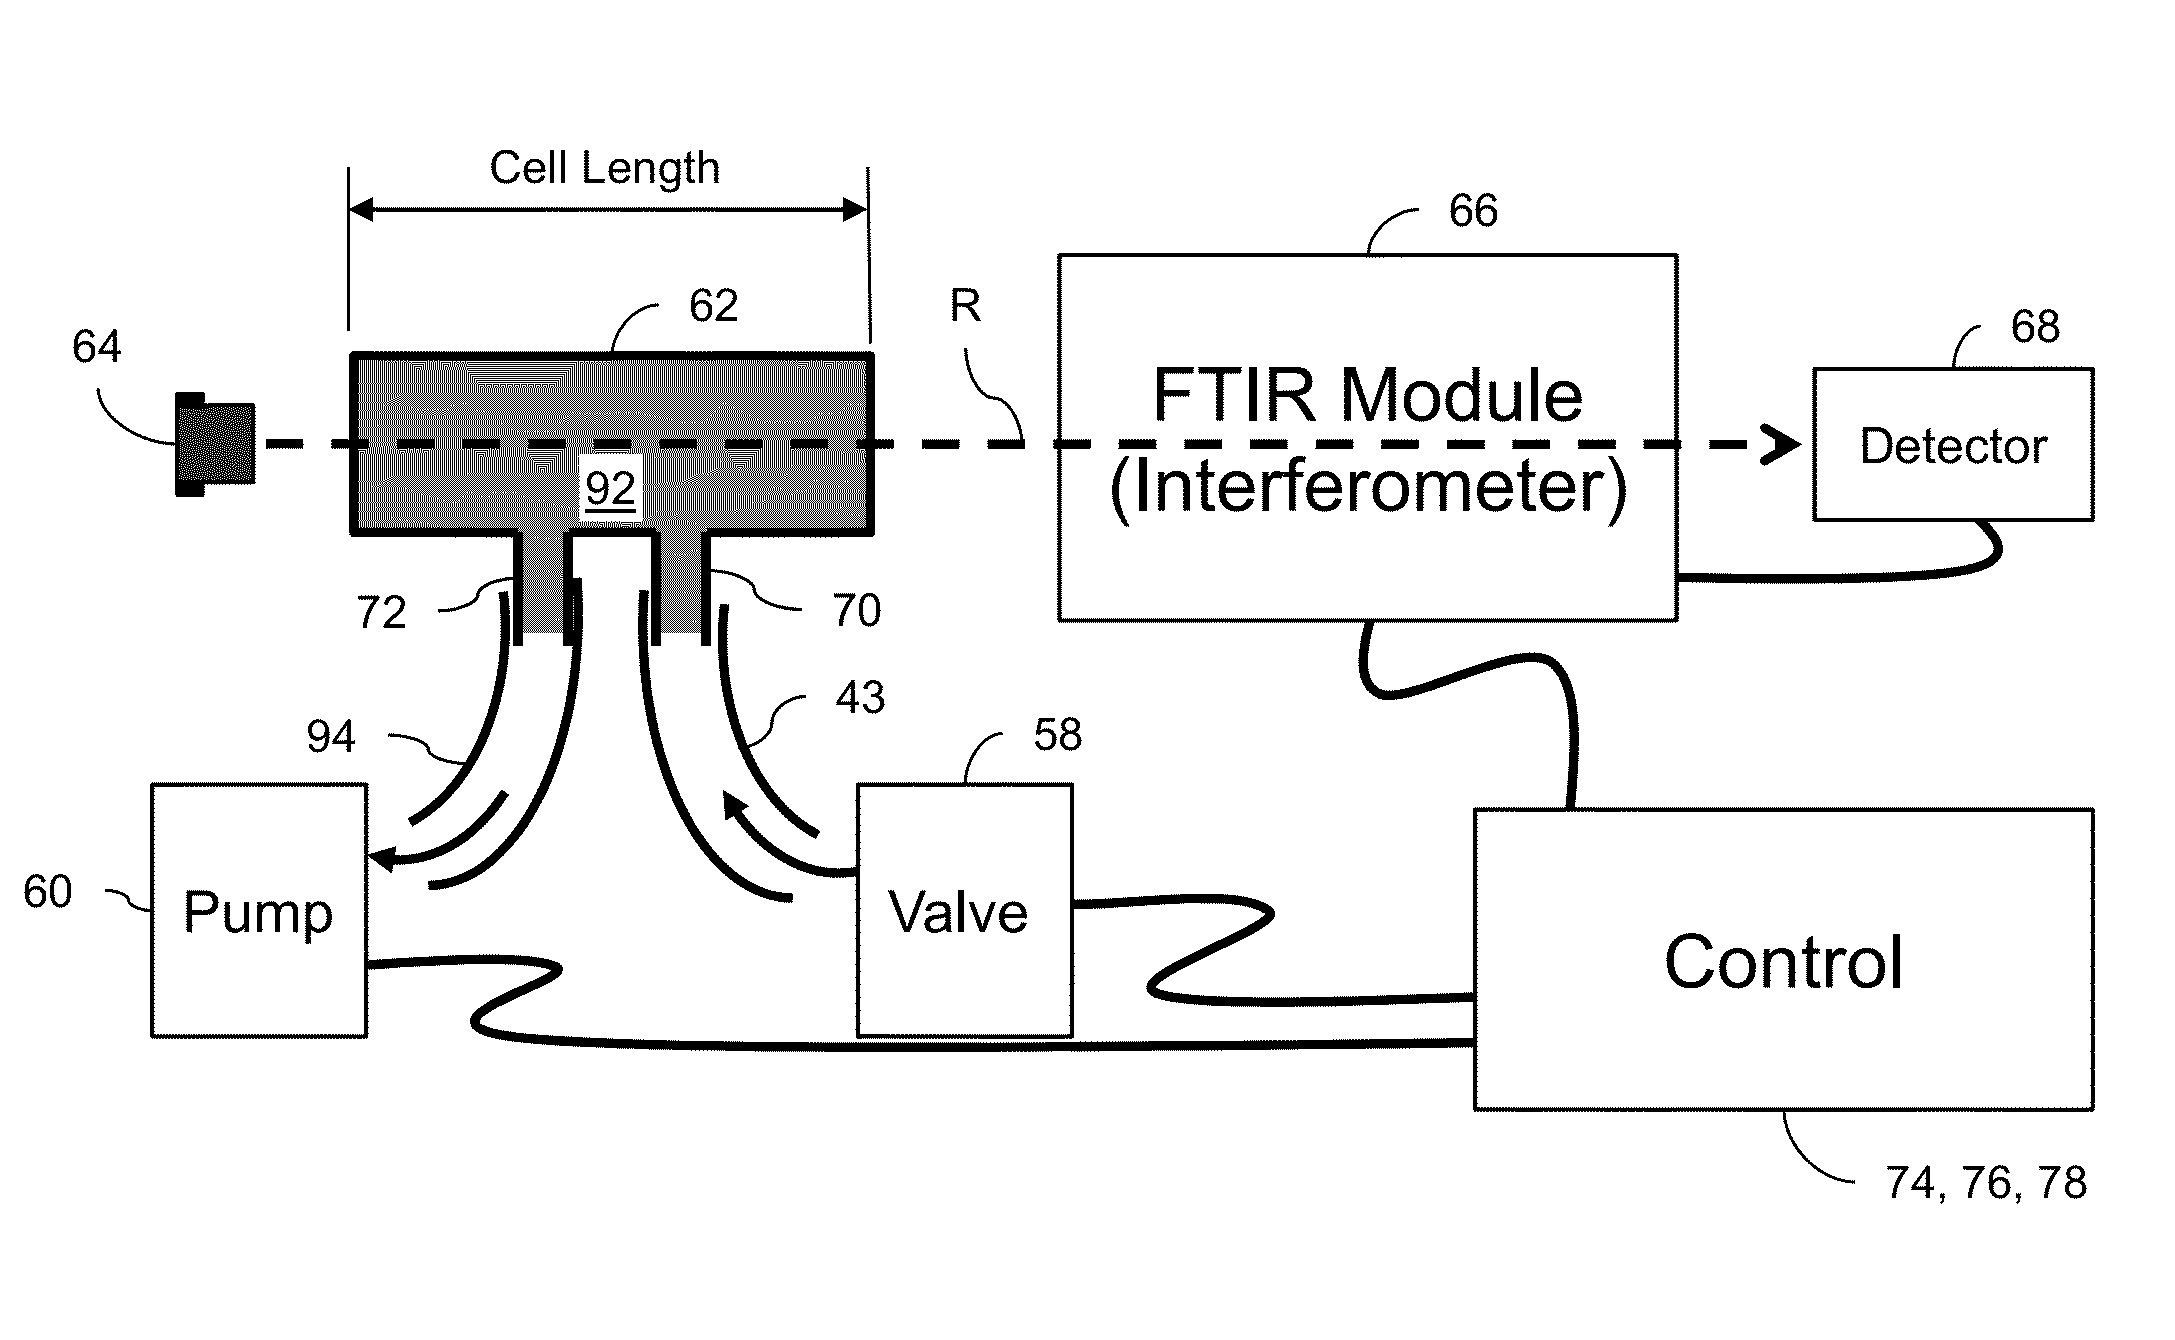 Methods and Devices for Analyzing Gases in Well-Related Fluids Using Fourier Transform Infrared (FTIR) Spectroscopy